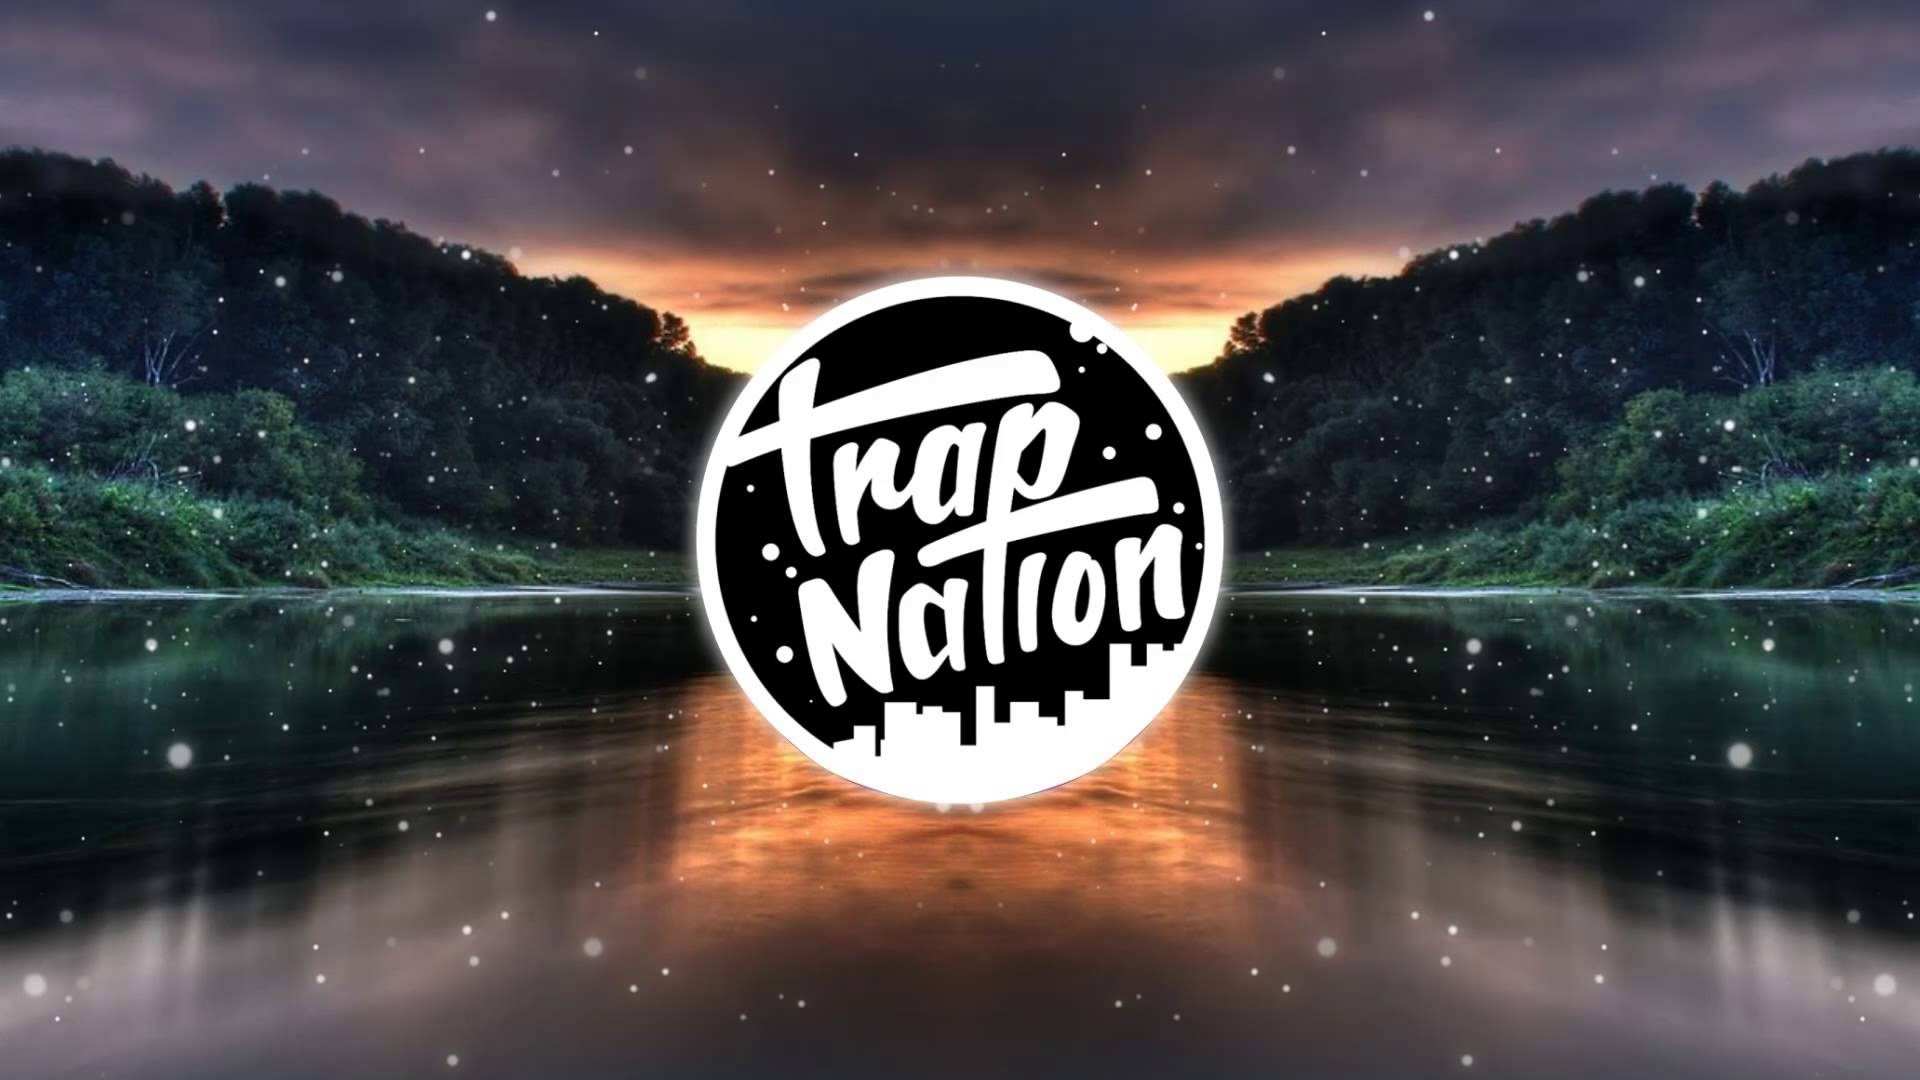 Katie Sky Monsters K Theory Remix - Trap Nation Capa , HD Wallpaper & Backgrounds